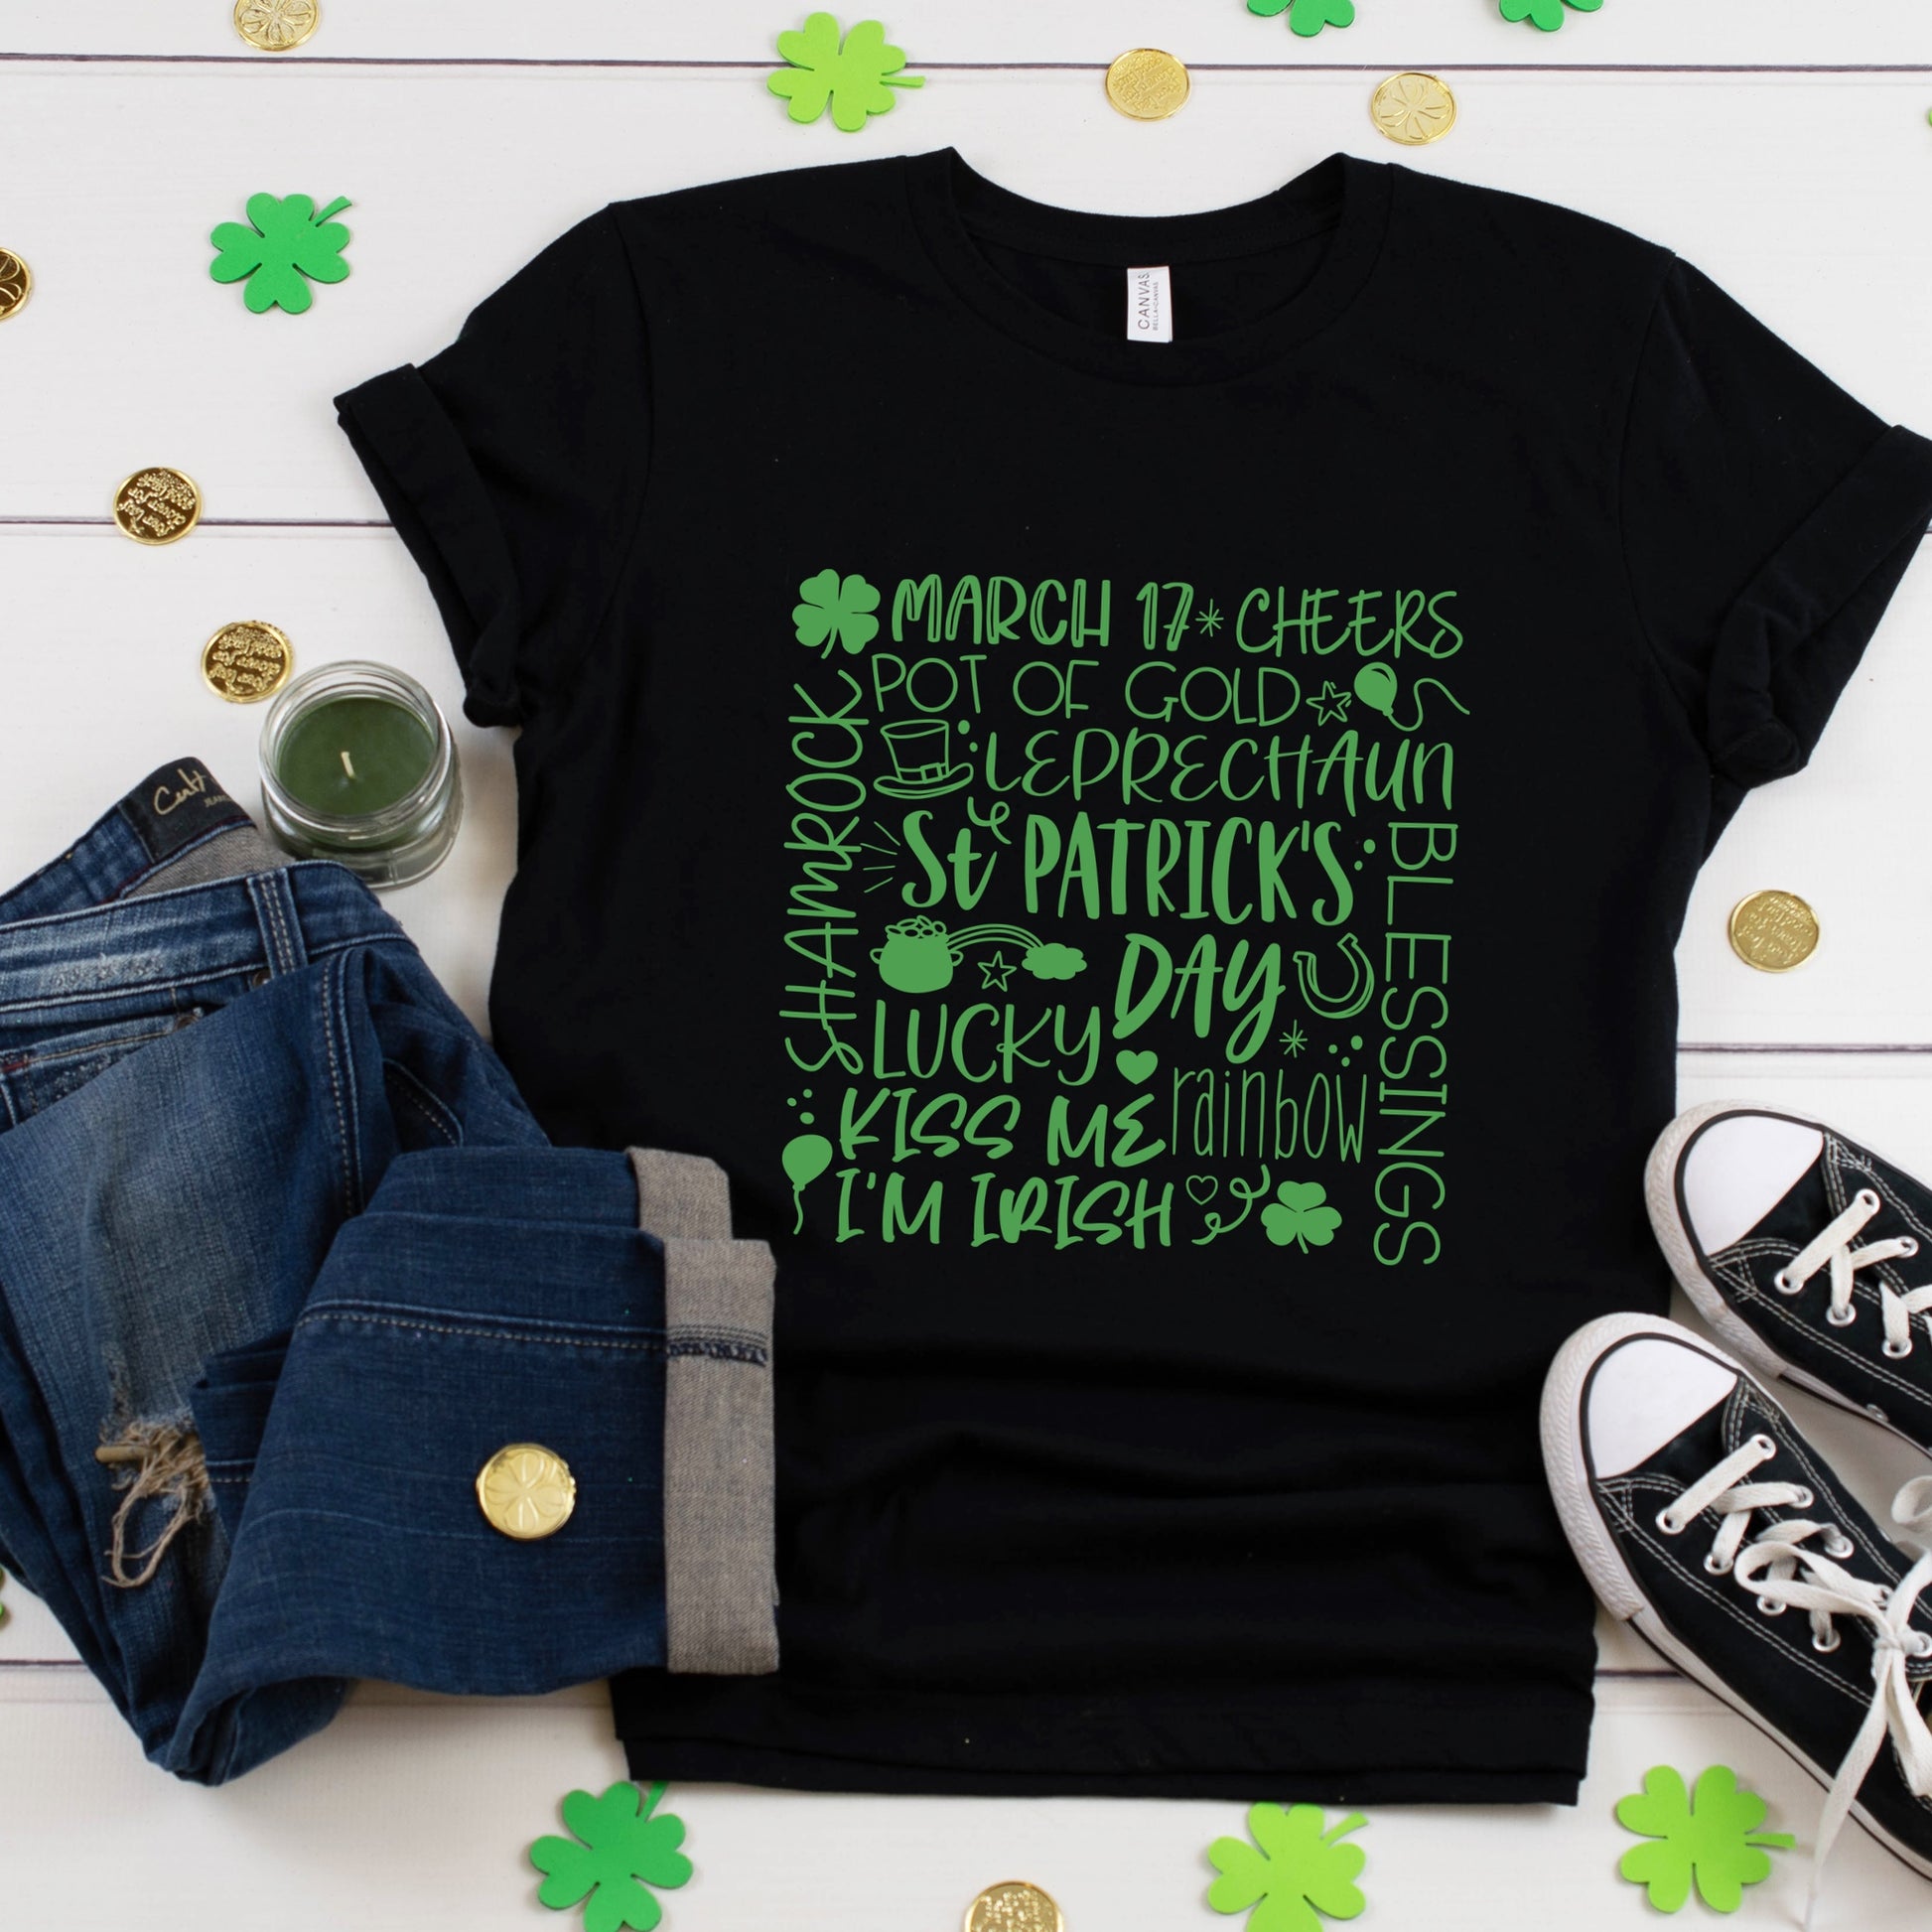 Green St. Patrick's Day Iron-On-Heat Transfers with clovers, rainbows, and pots of gold